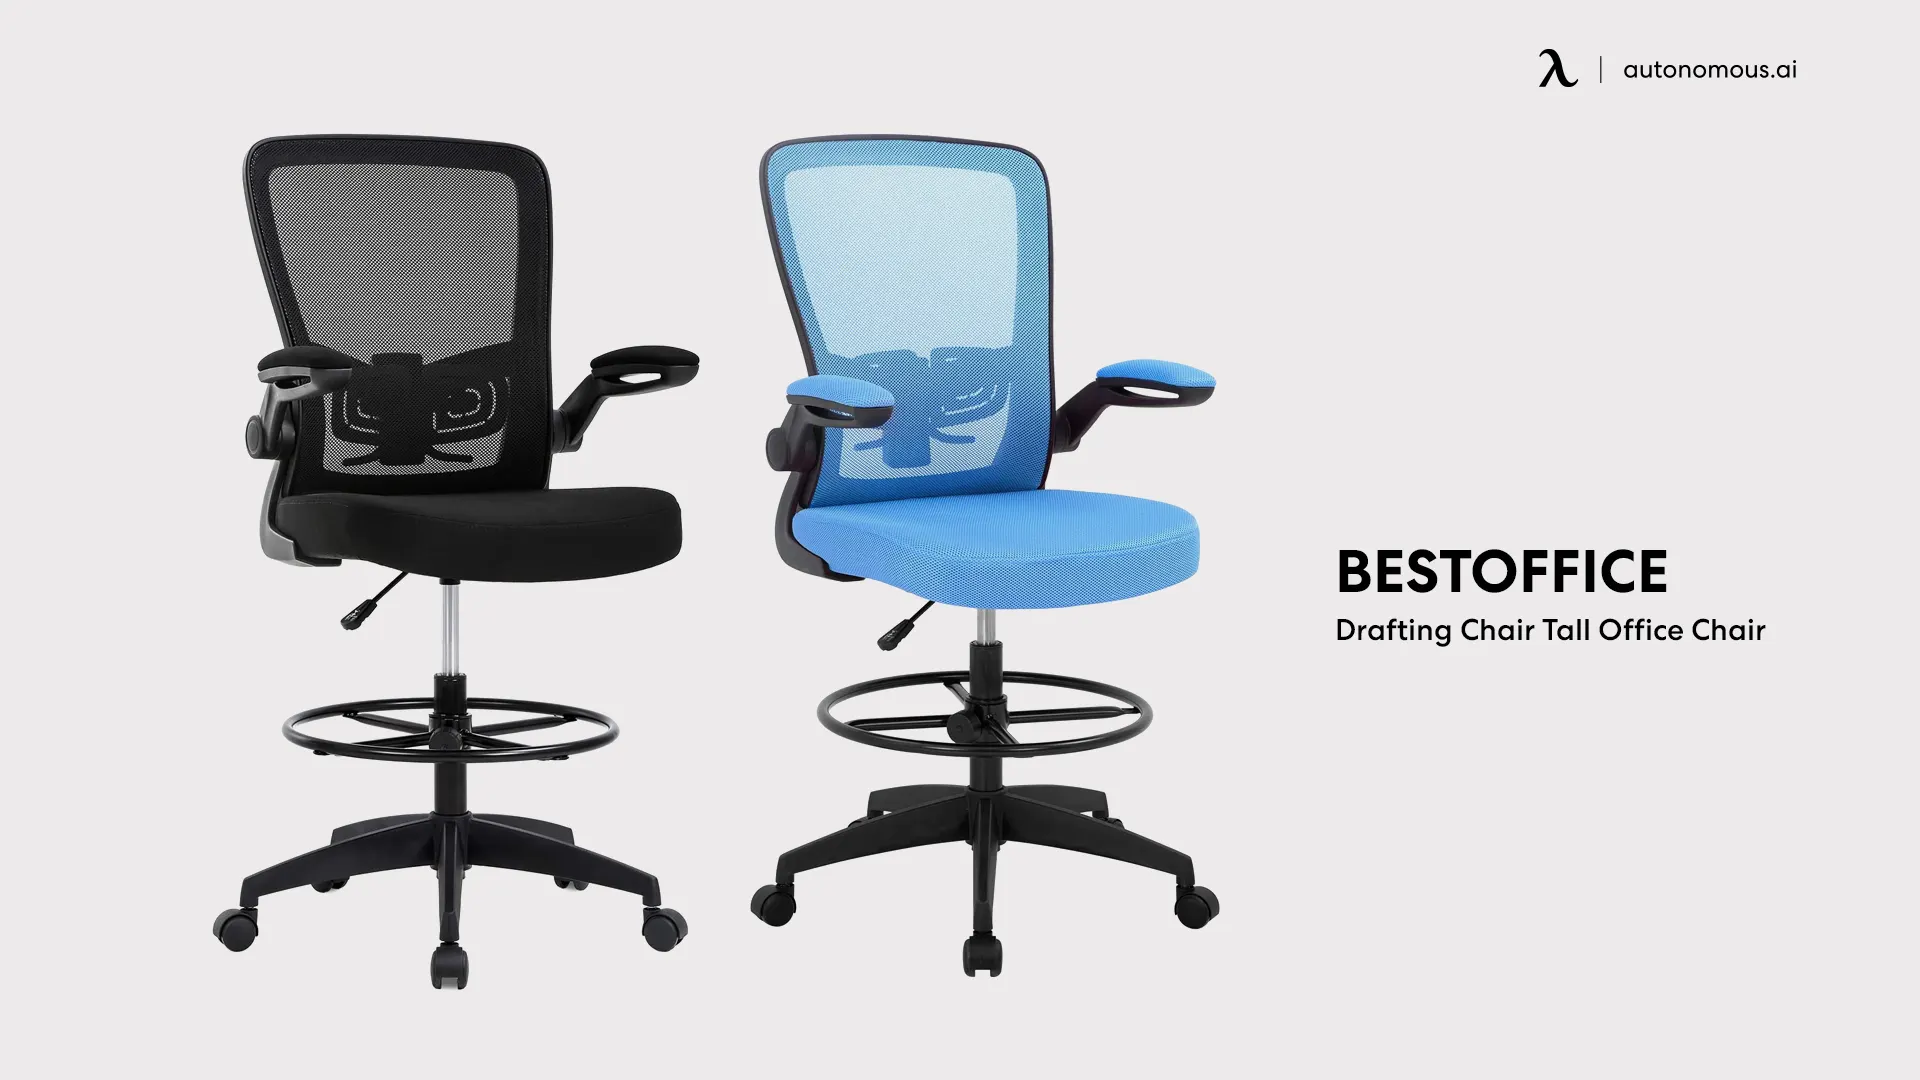 Drafting Chair Tall Office Chair - most comfortable chairs for relaxing